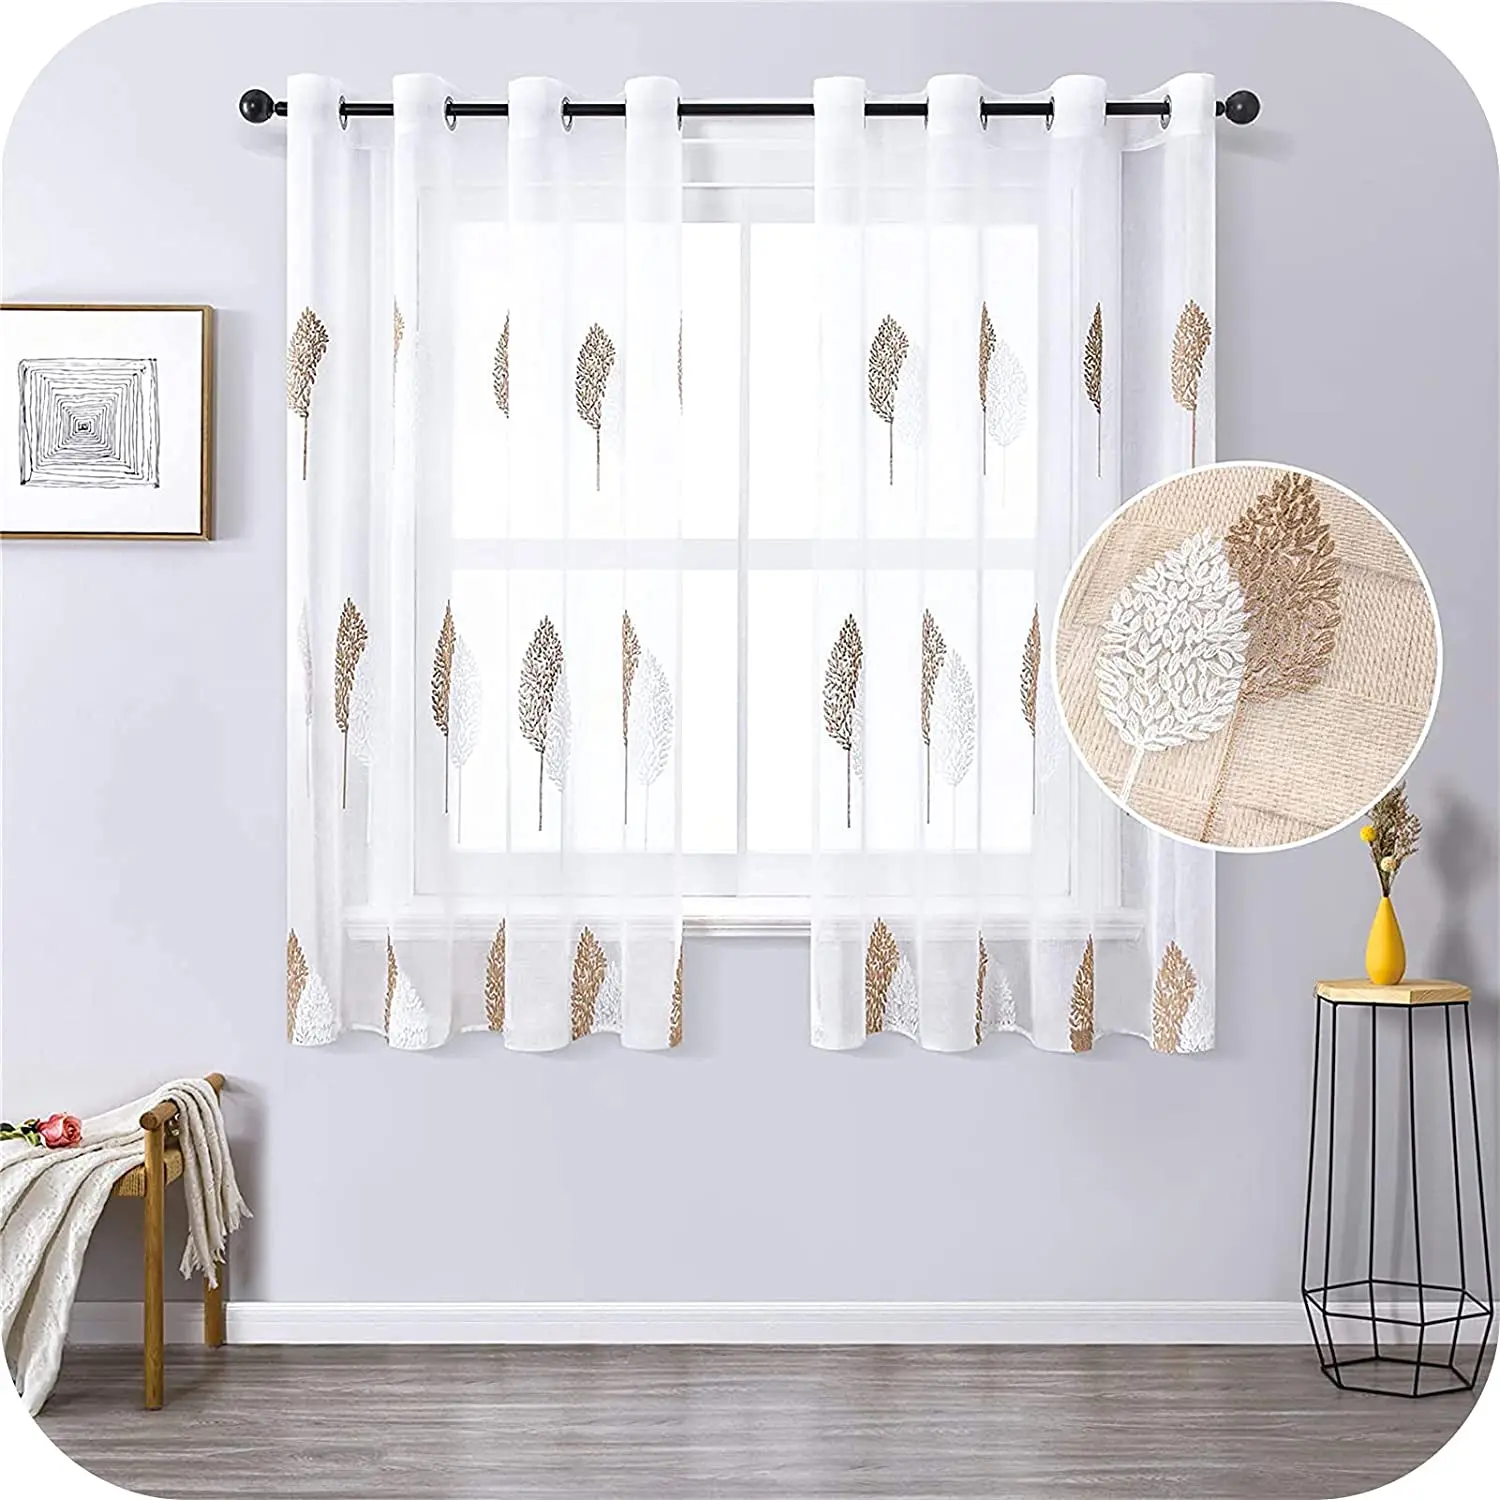 

LISM Modern Leaf Embroidery Short Sheer Curtains for Living Room Bedroom Kids Cortinas Tulle Kitchen Window Treatment Drapes